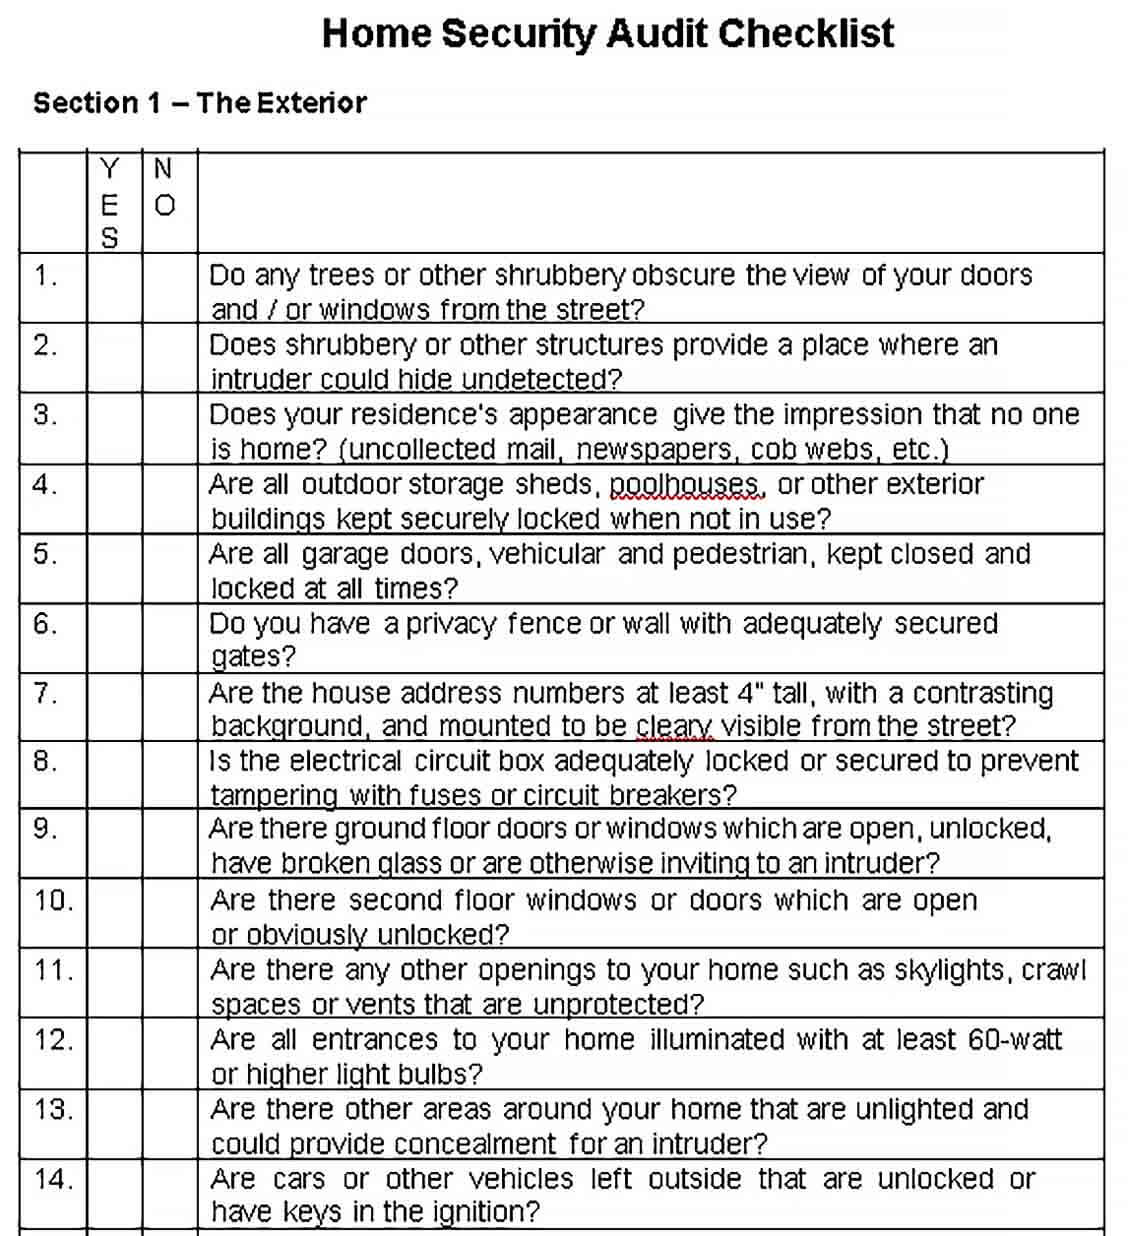 Sample Home Security Audit Checklist Template